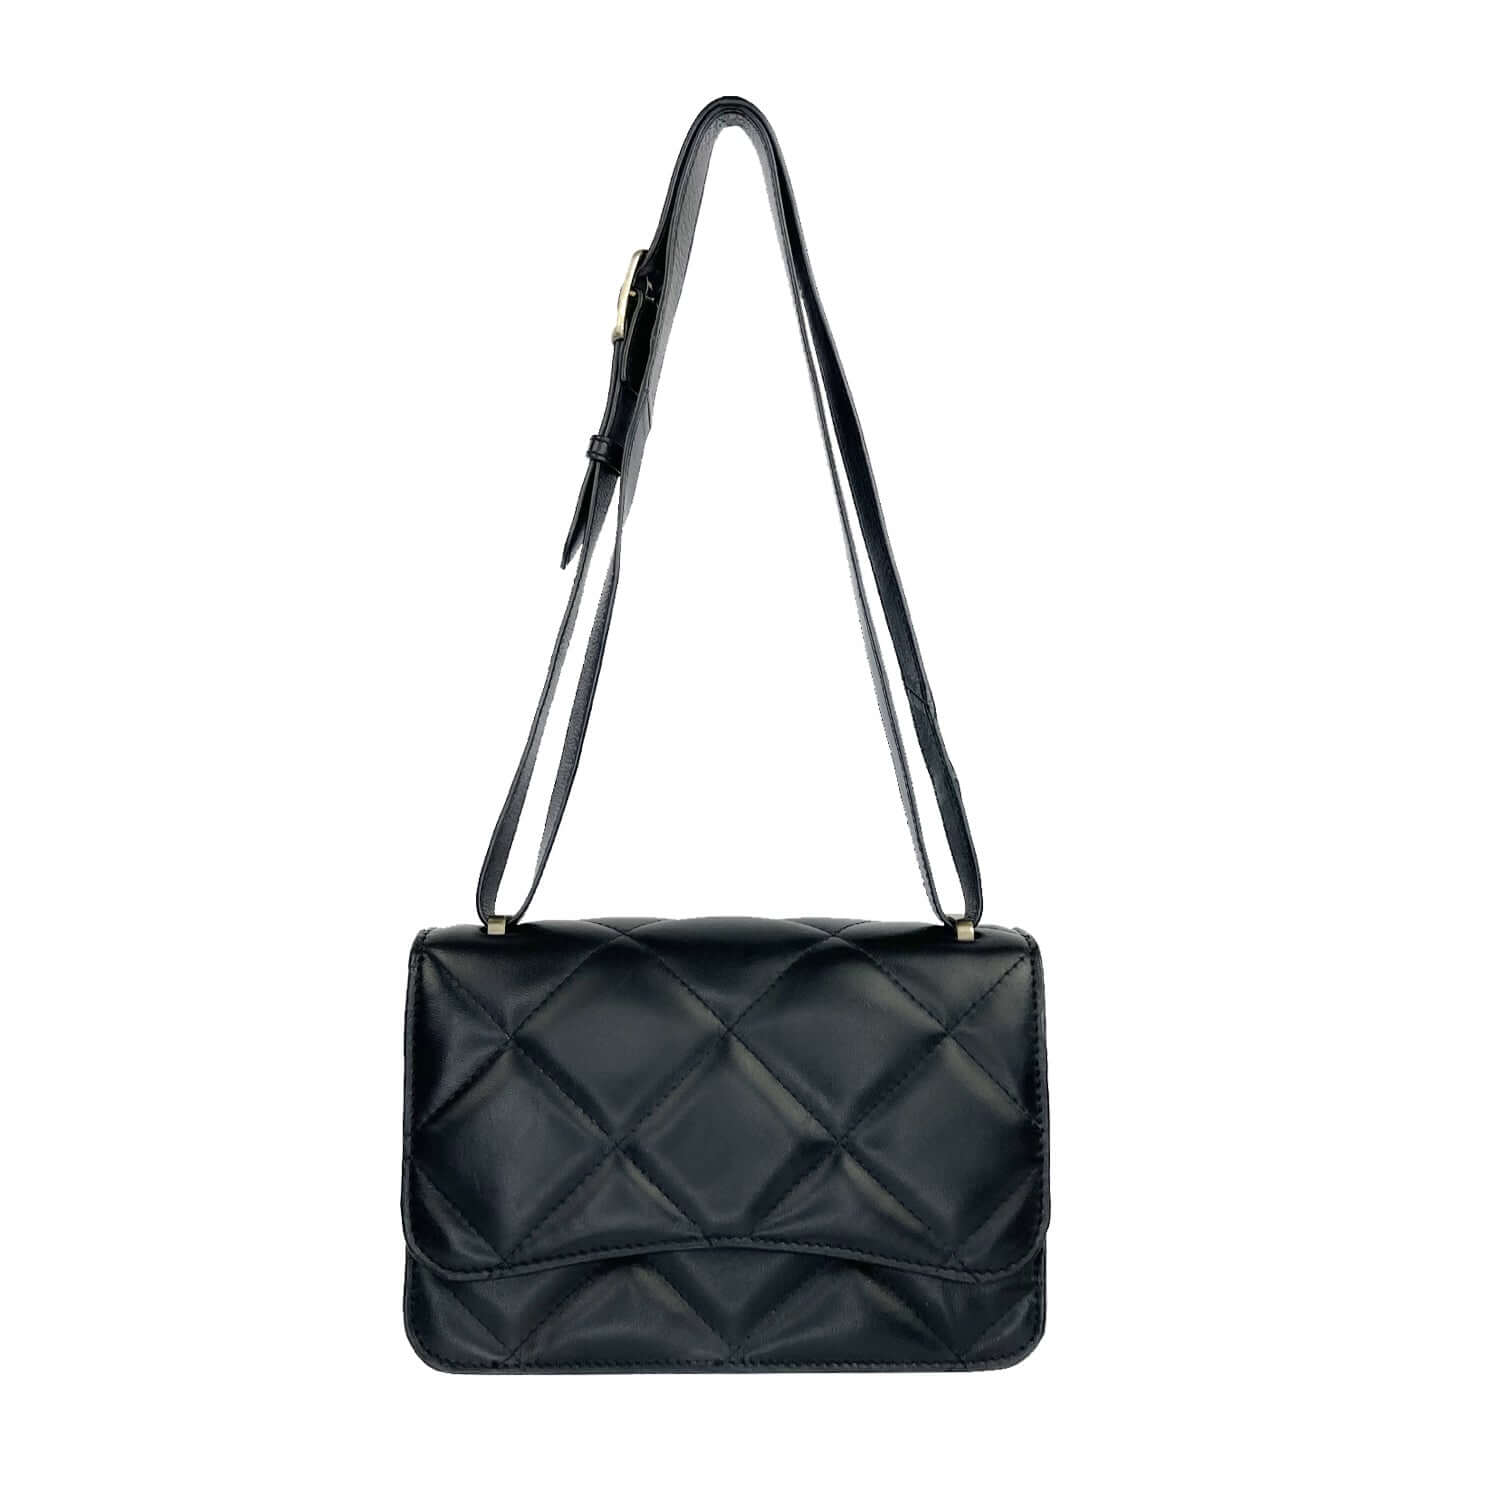 Asta diamond quilted compartment crossbody bag in black chrome-free sheep leather.